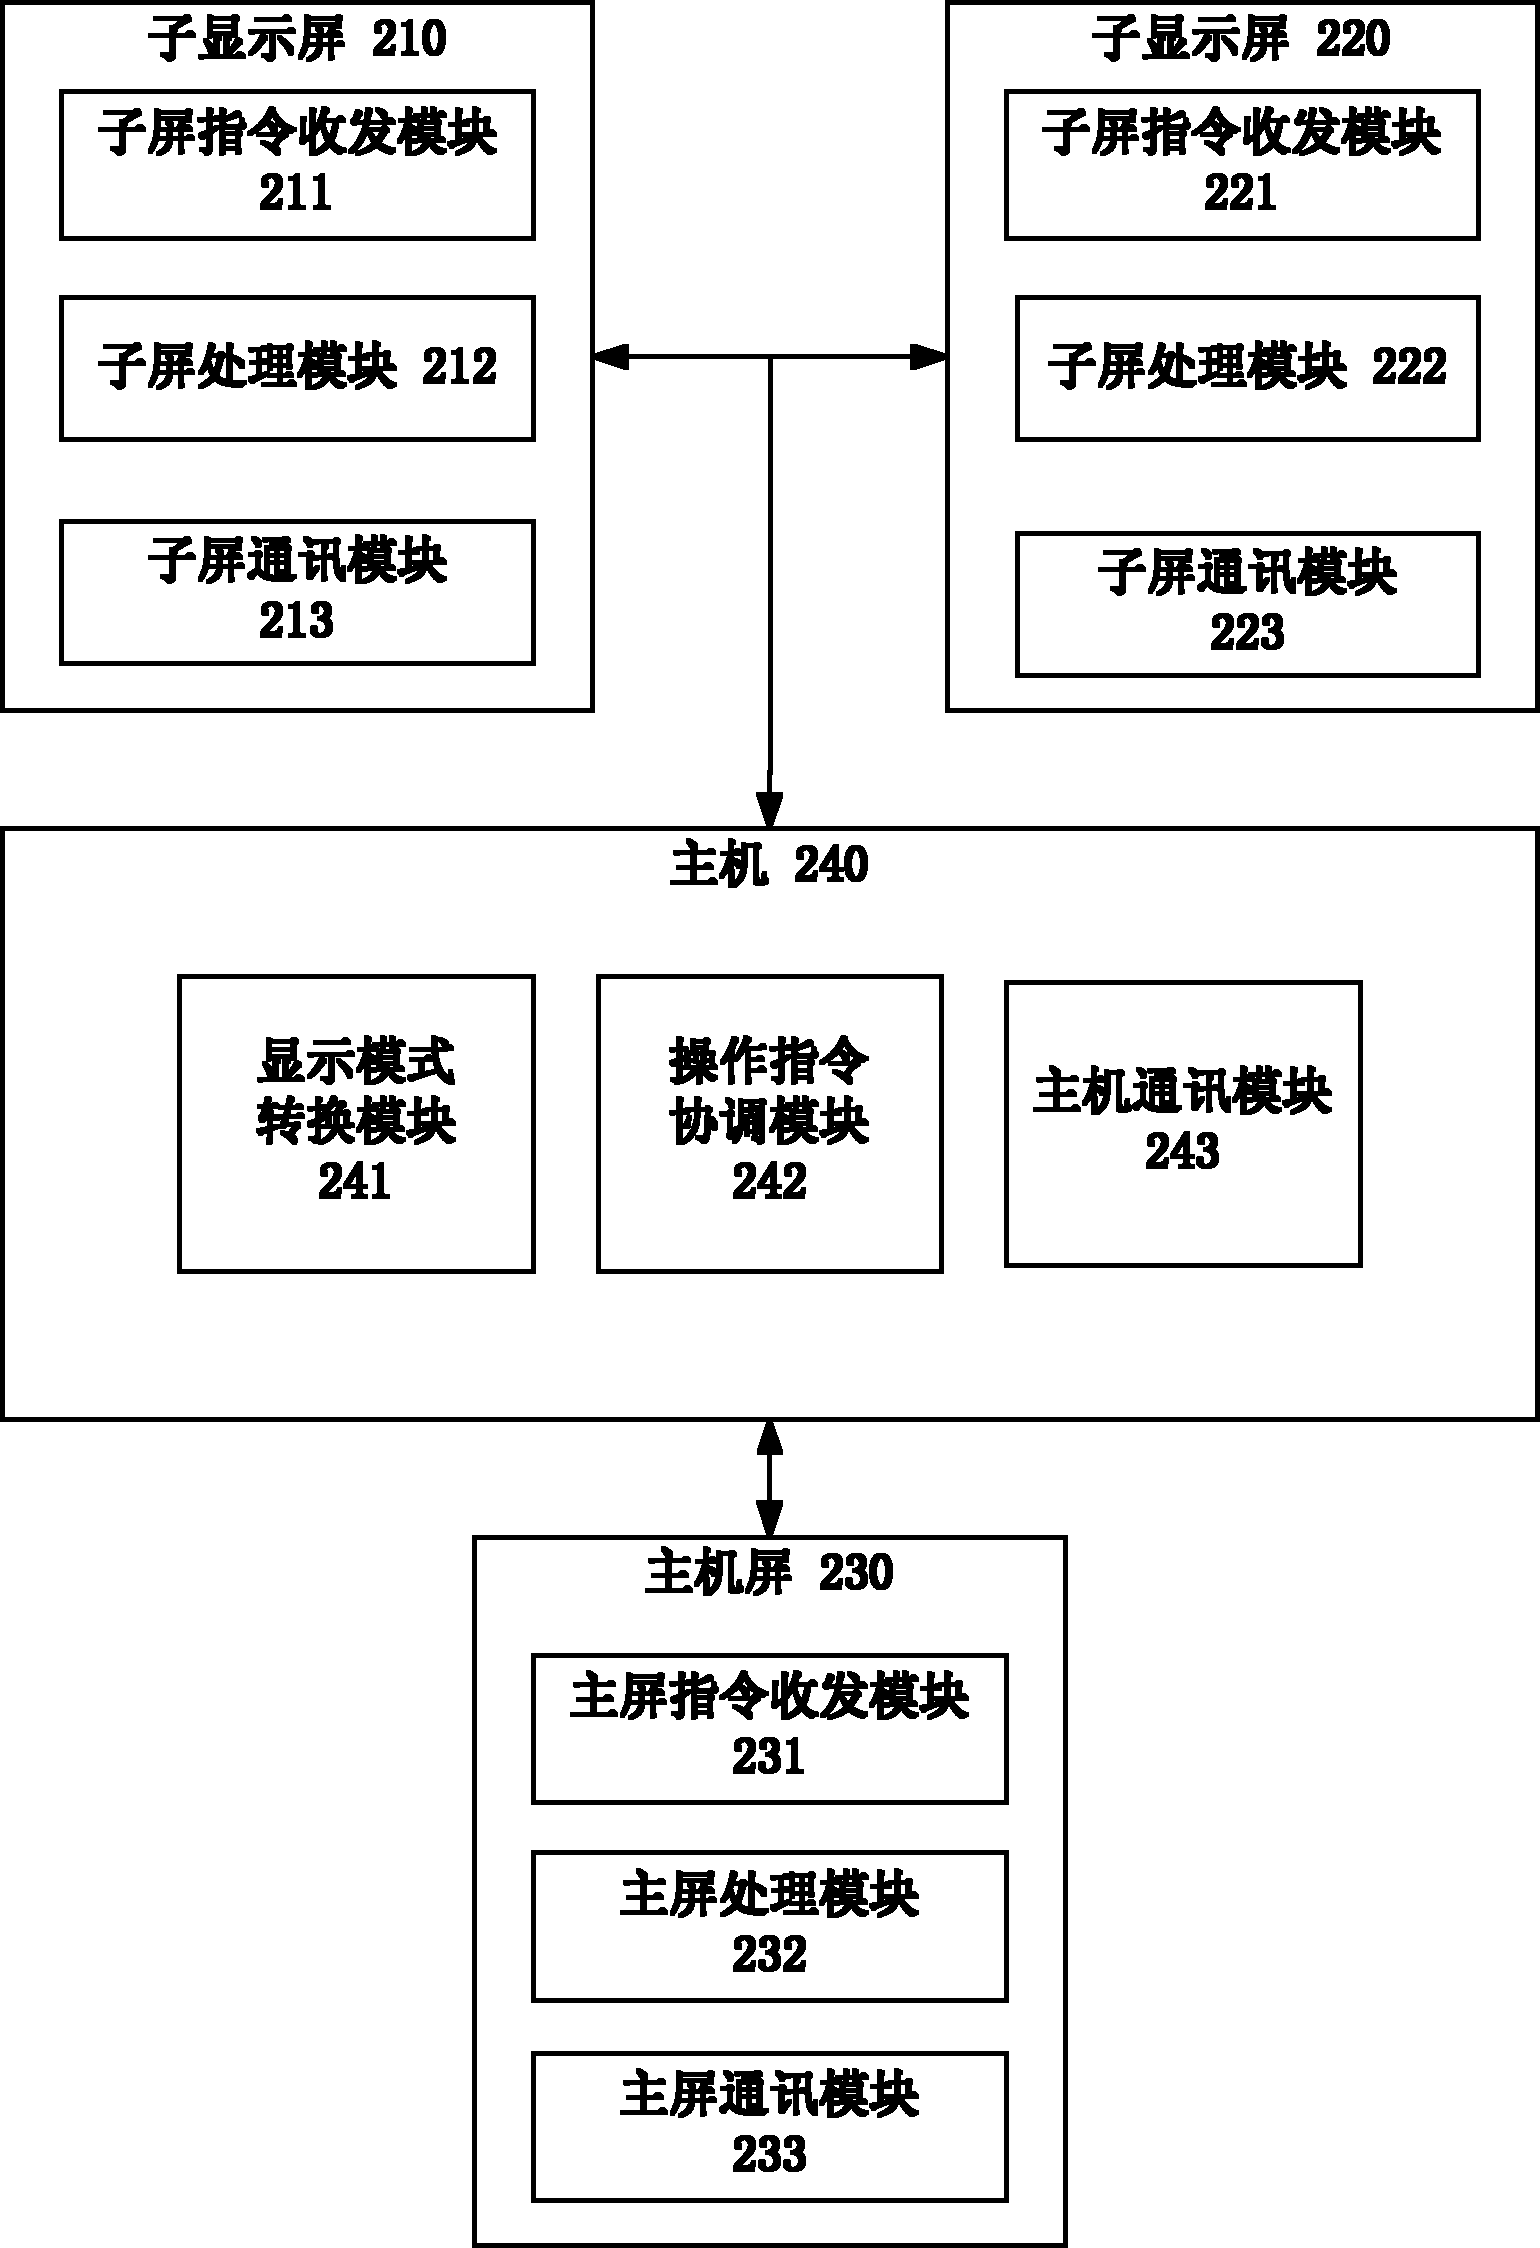 On-board computer multi-screen display method and system